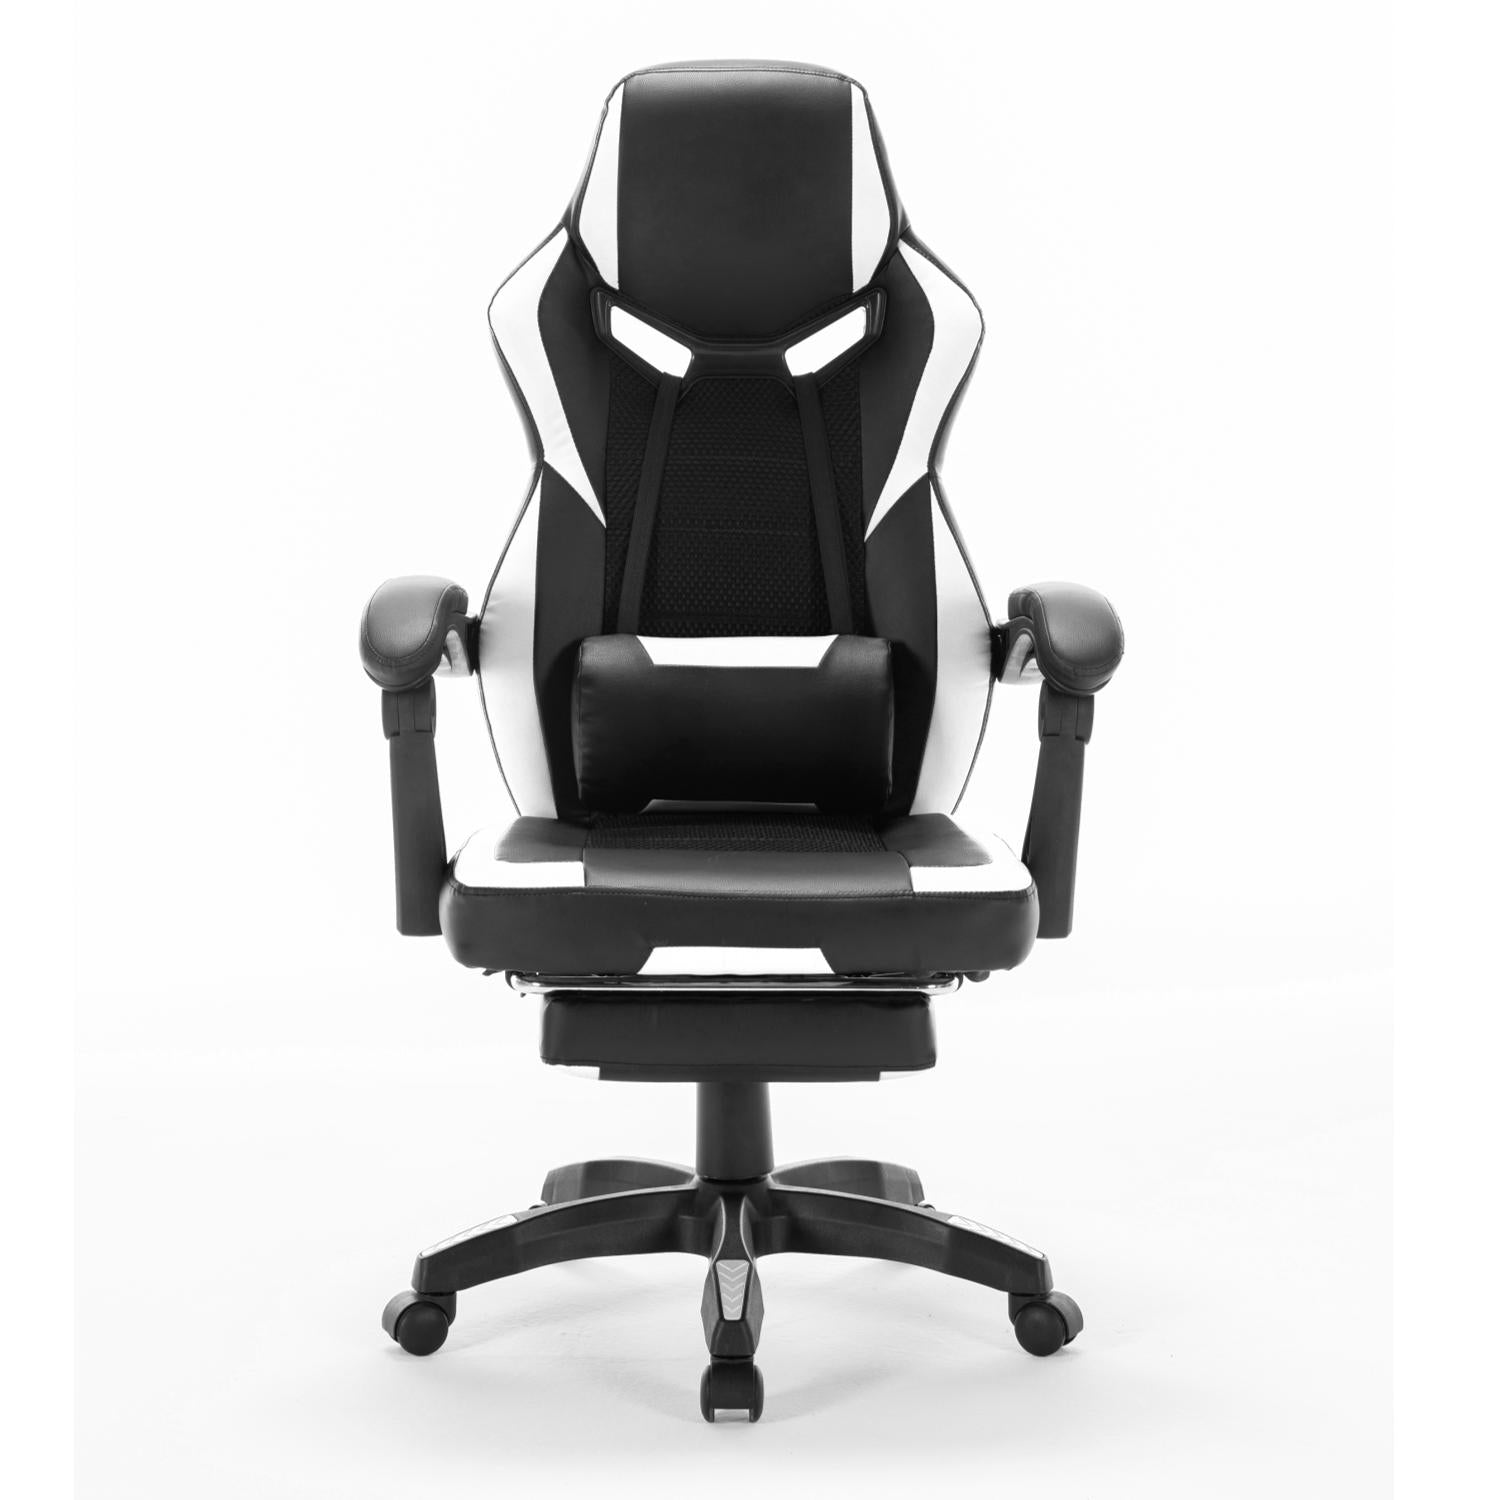 ViscoLogic Merlin Ergonomic Adjustable Swivel Home Office Computer Gaming Chair with Footrest